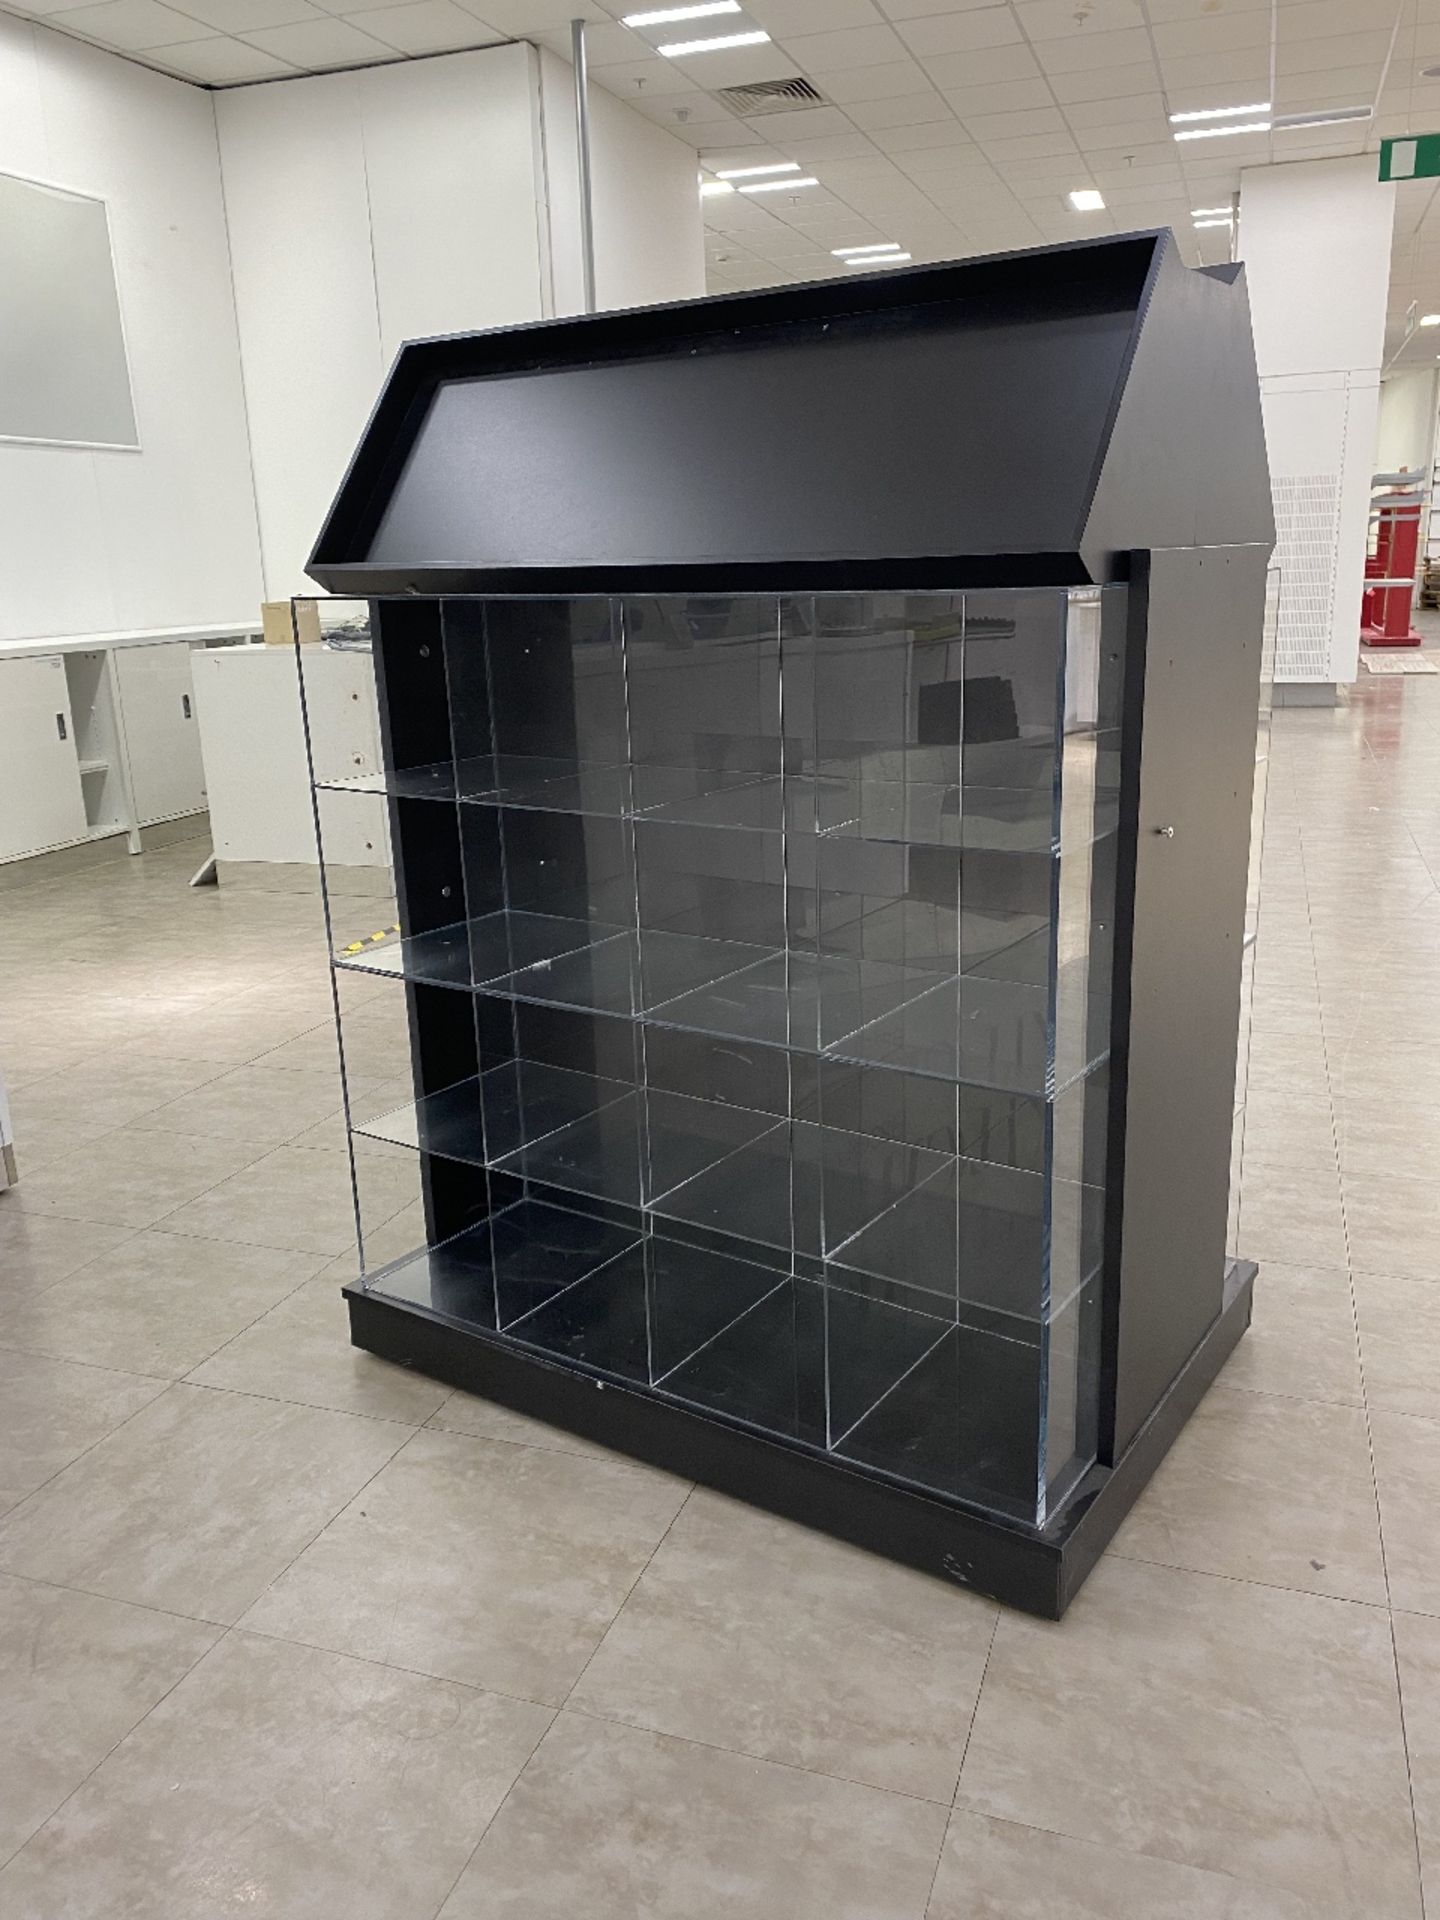 Retail dual sided display unit - Image 2 of 3